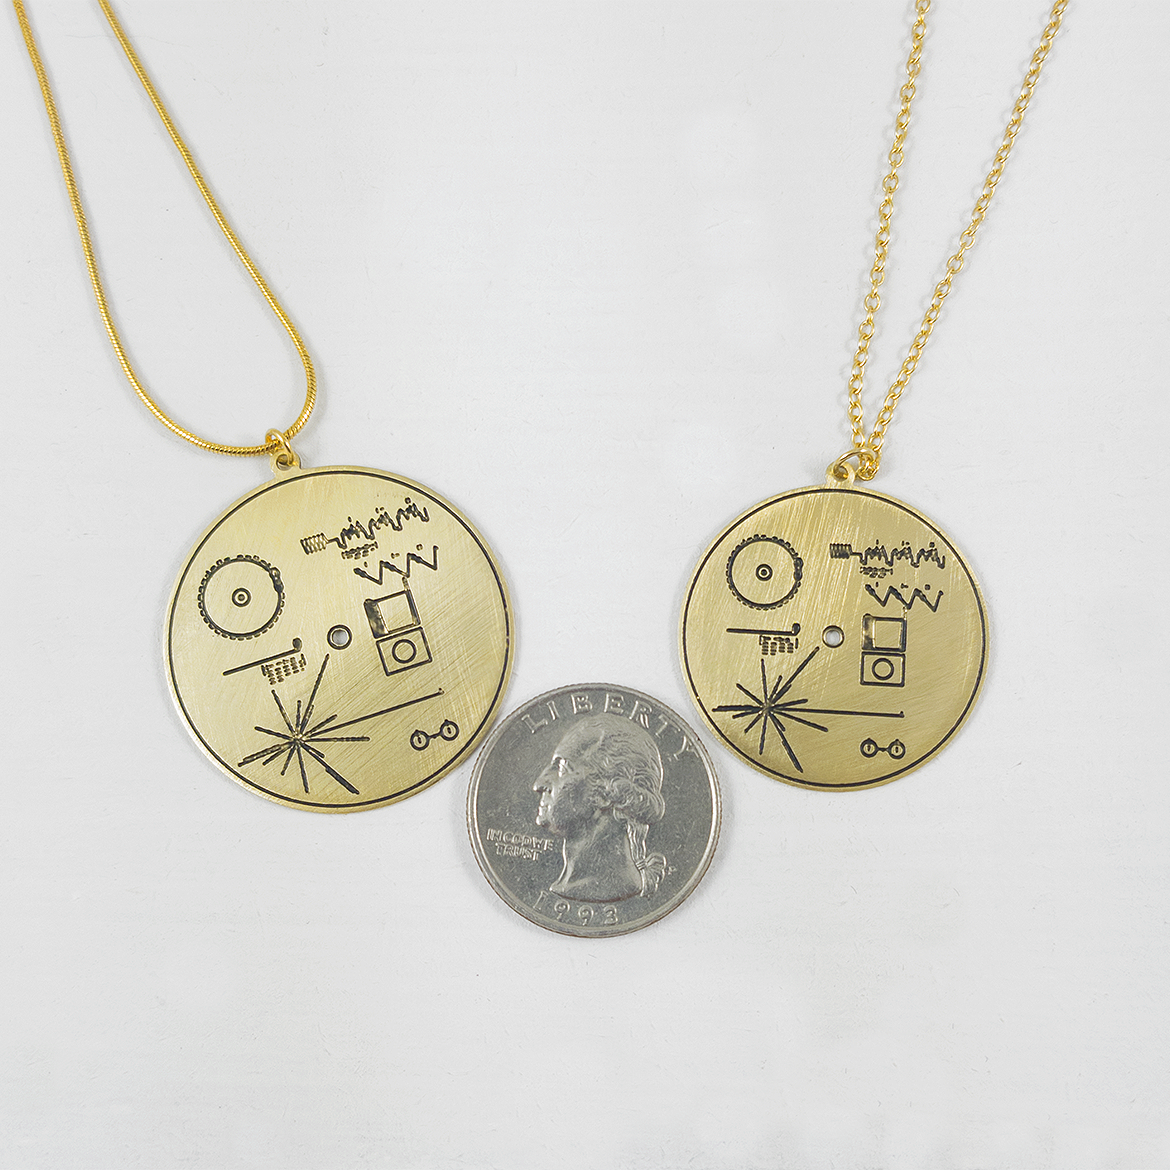 voyager golden record necklace